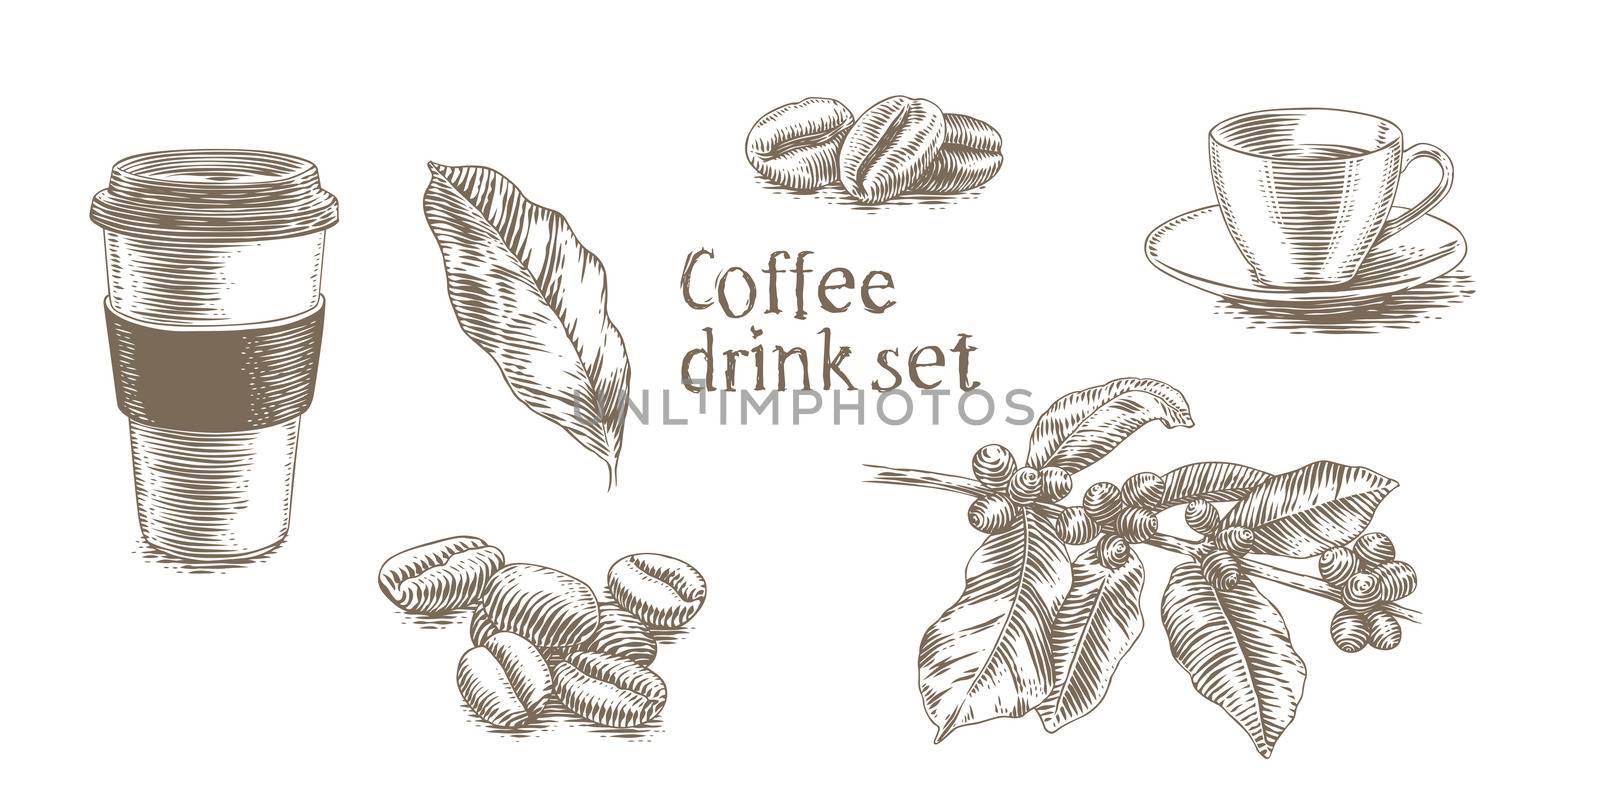 Coffee drink picture set by Angorius